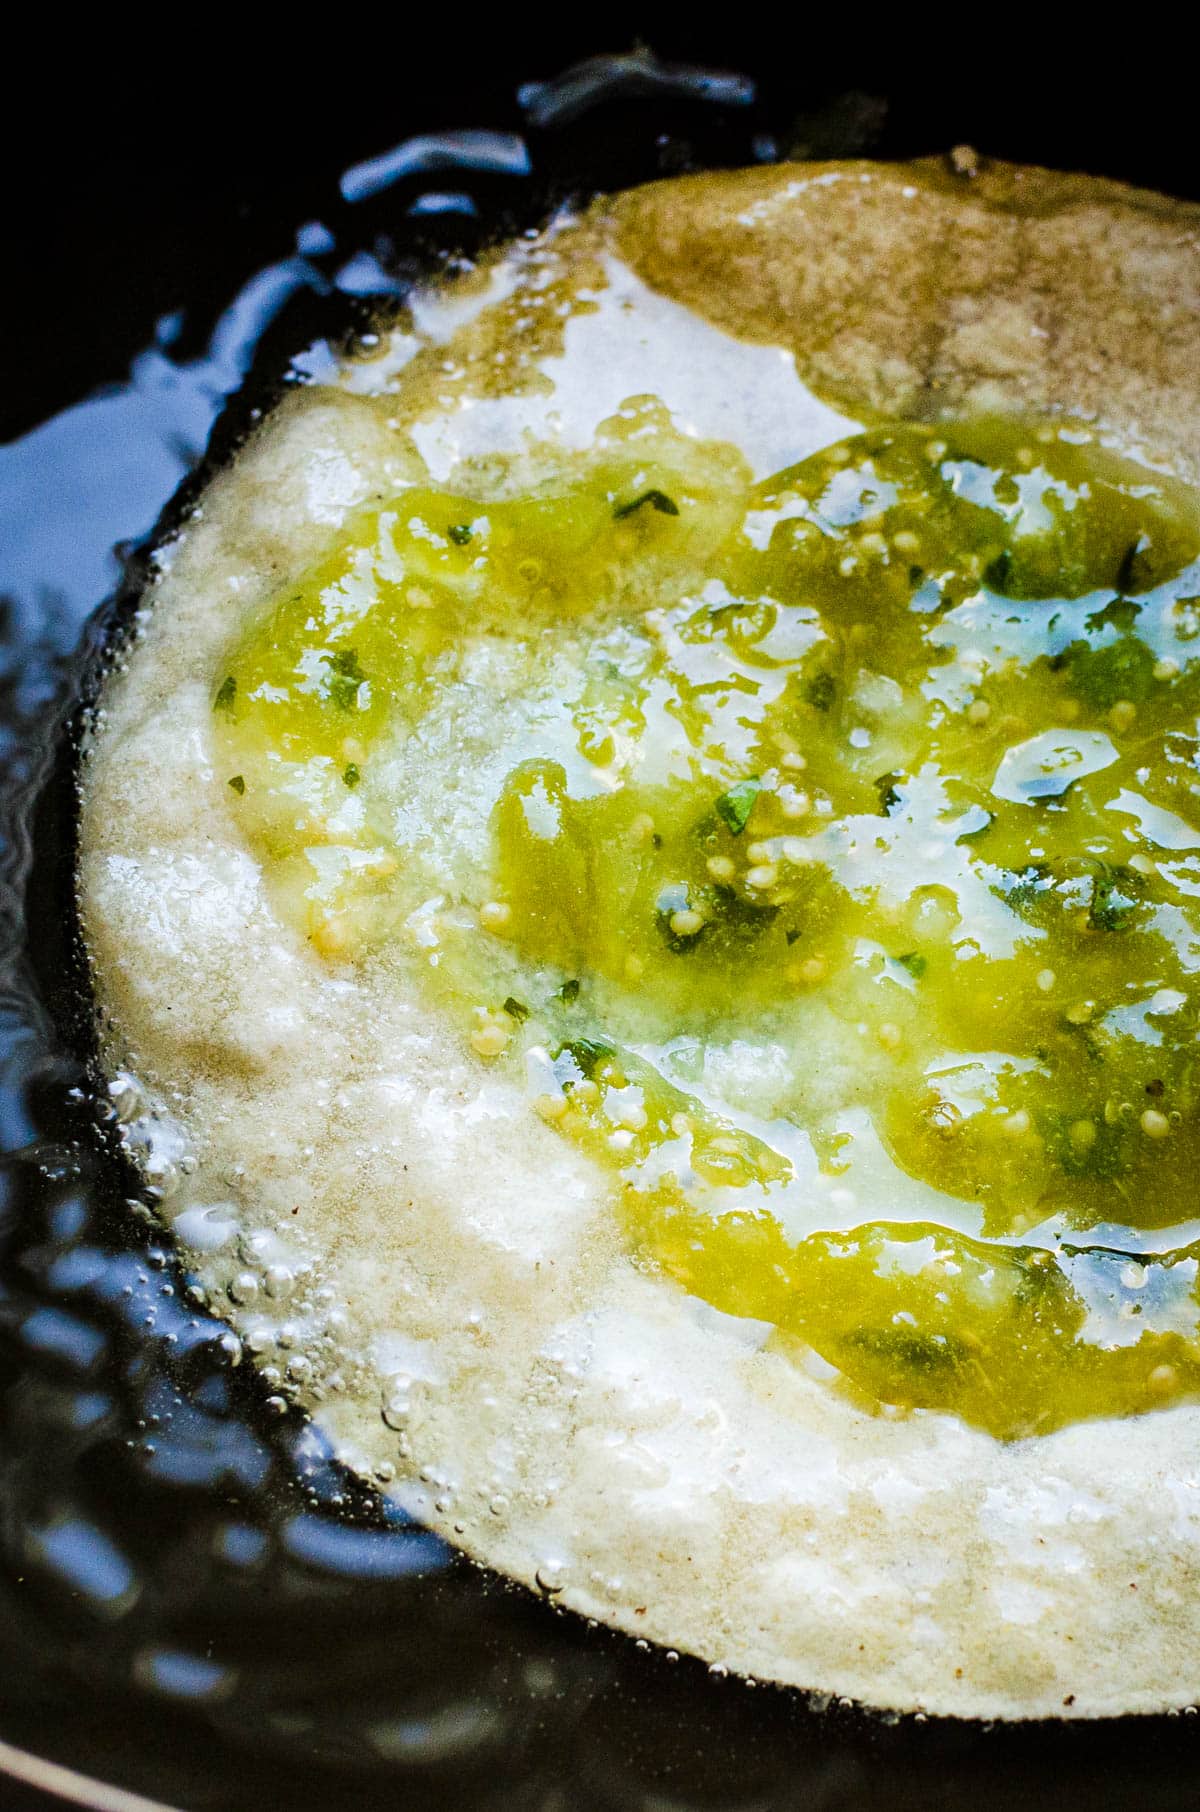 spooning salsa verde onto the corn tortilla while it's frying in the oil to make chalupas.